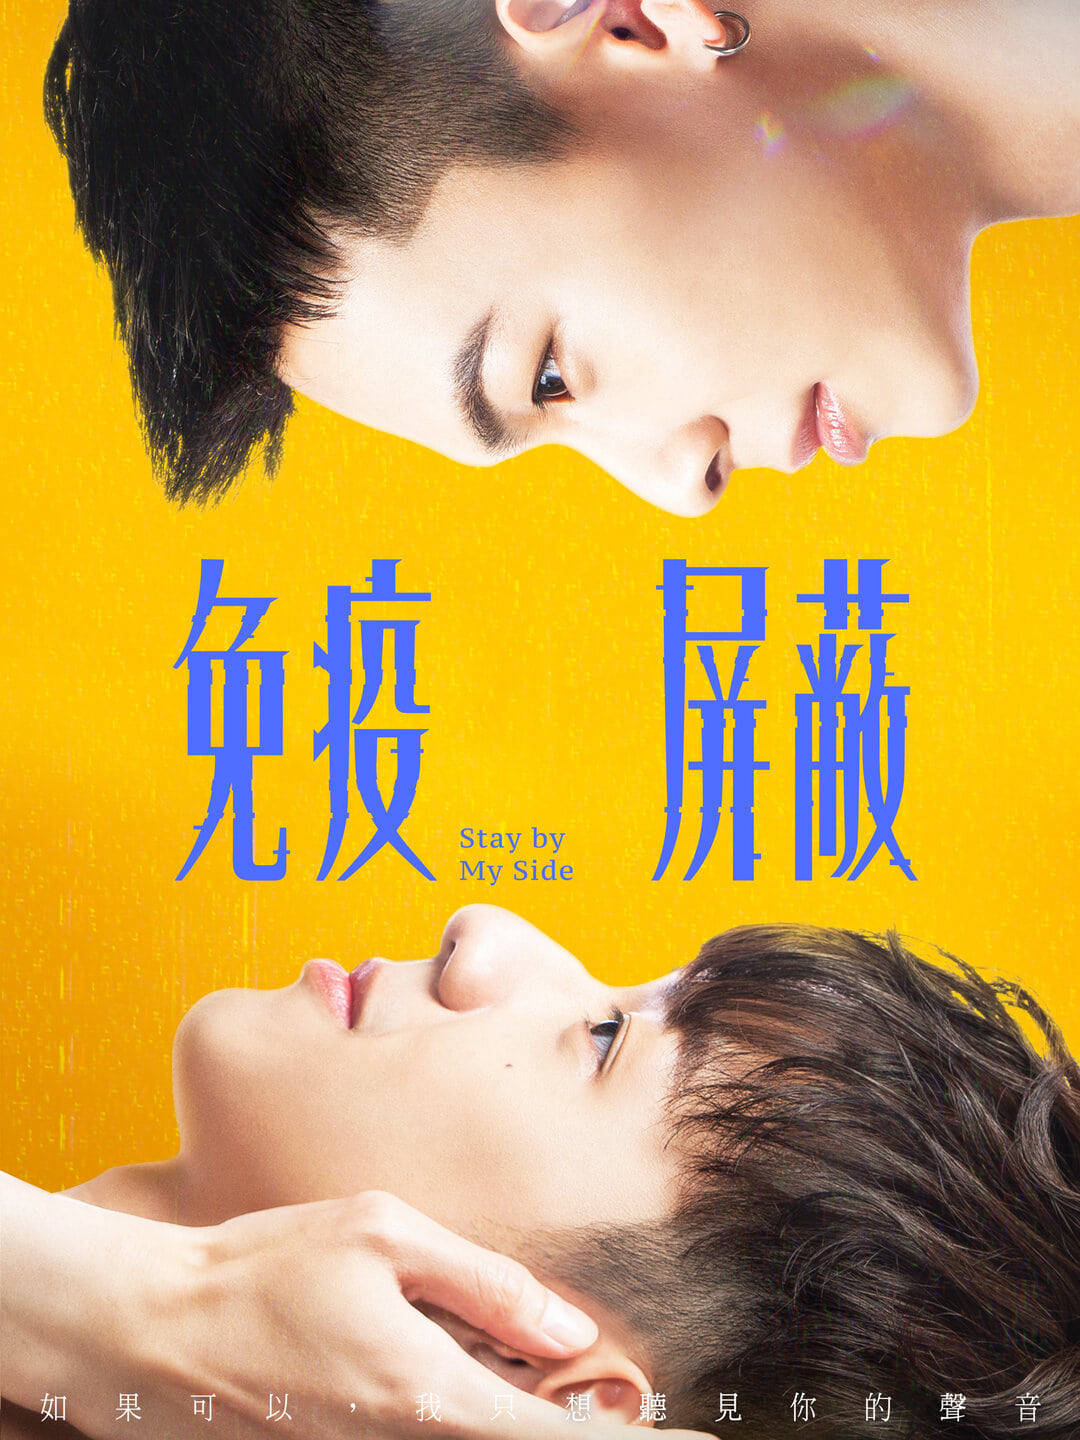 Poster Phim Lá Chắn Miễn Dịch (Stay by My Side)